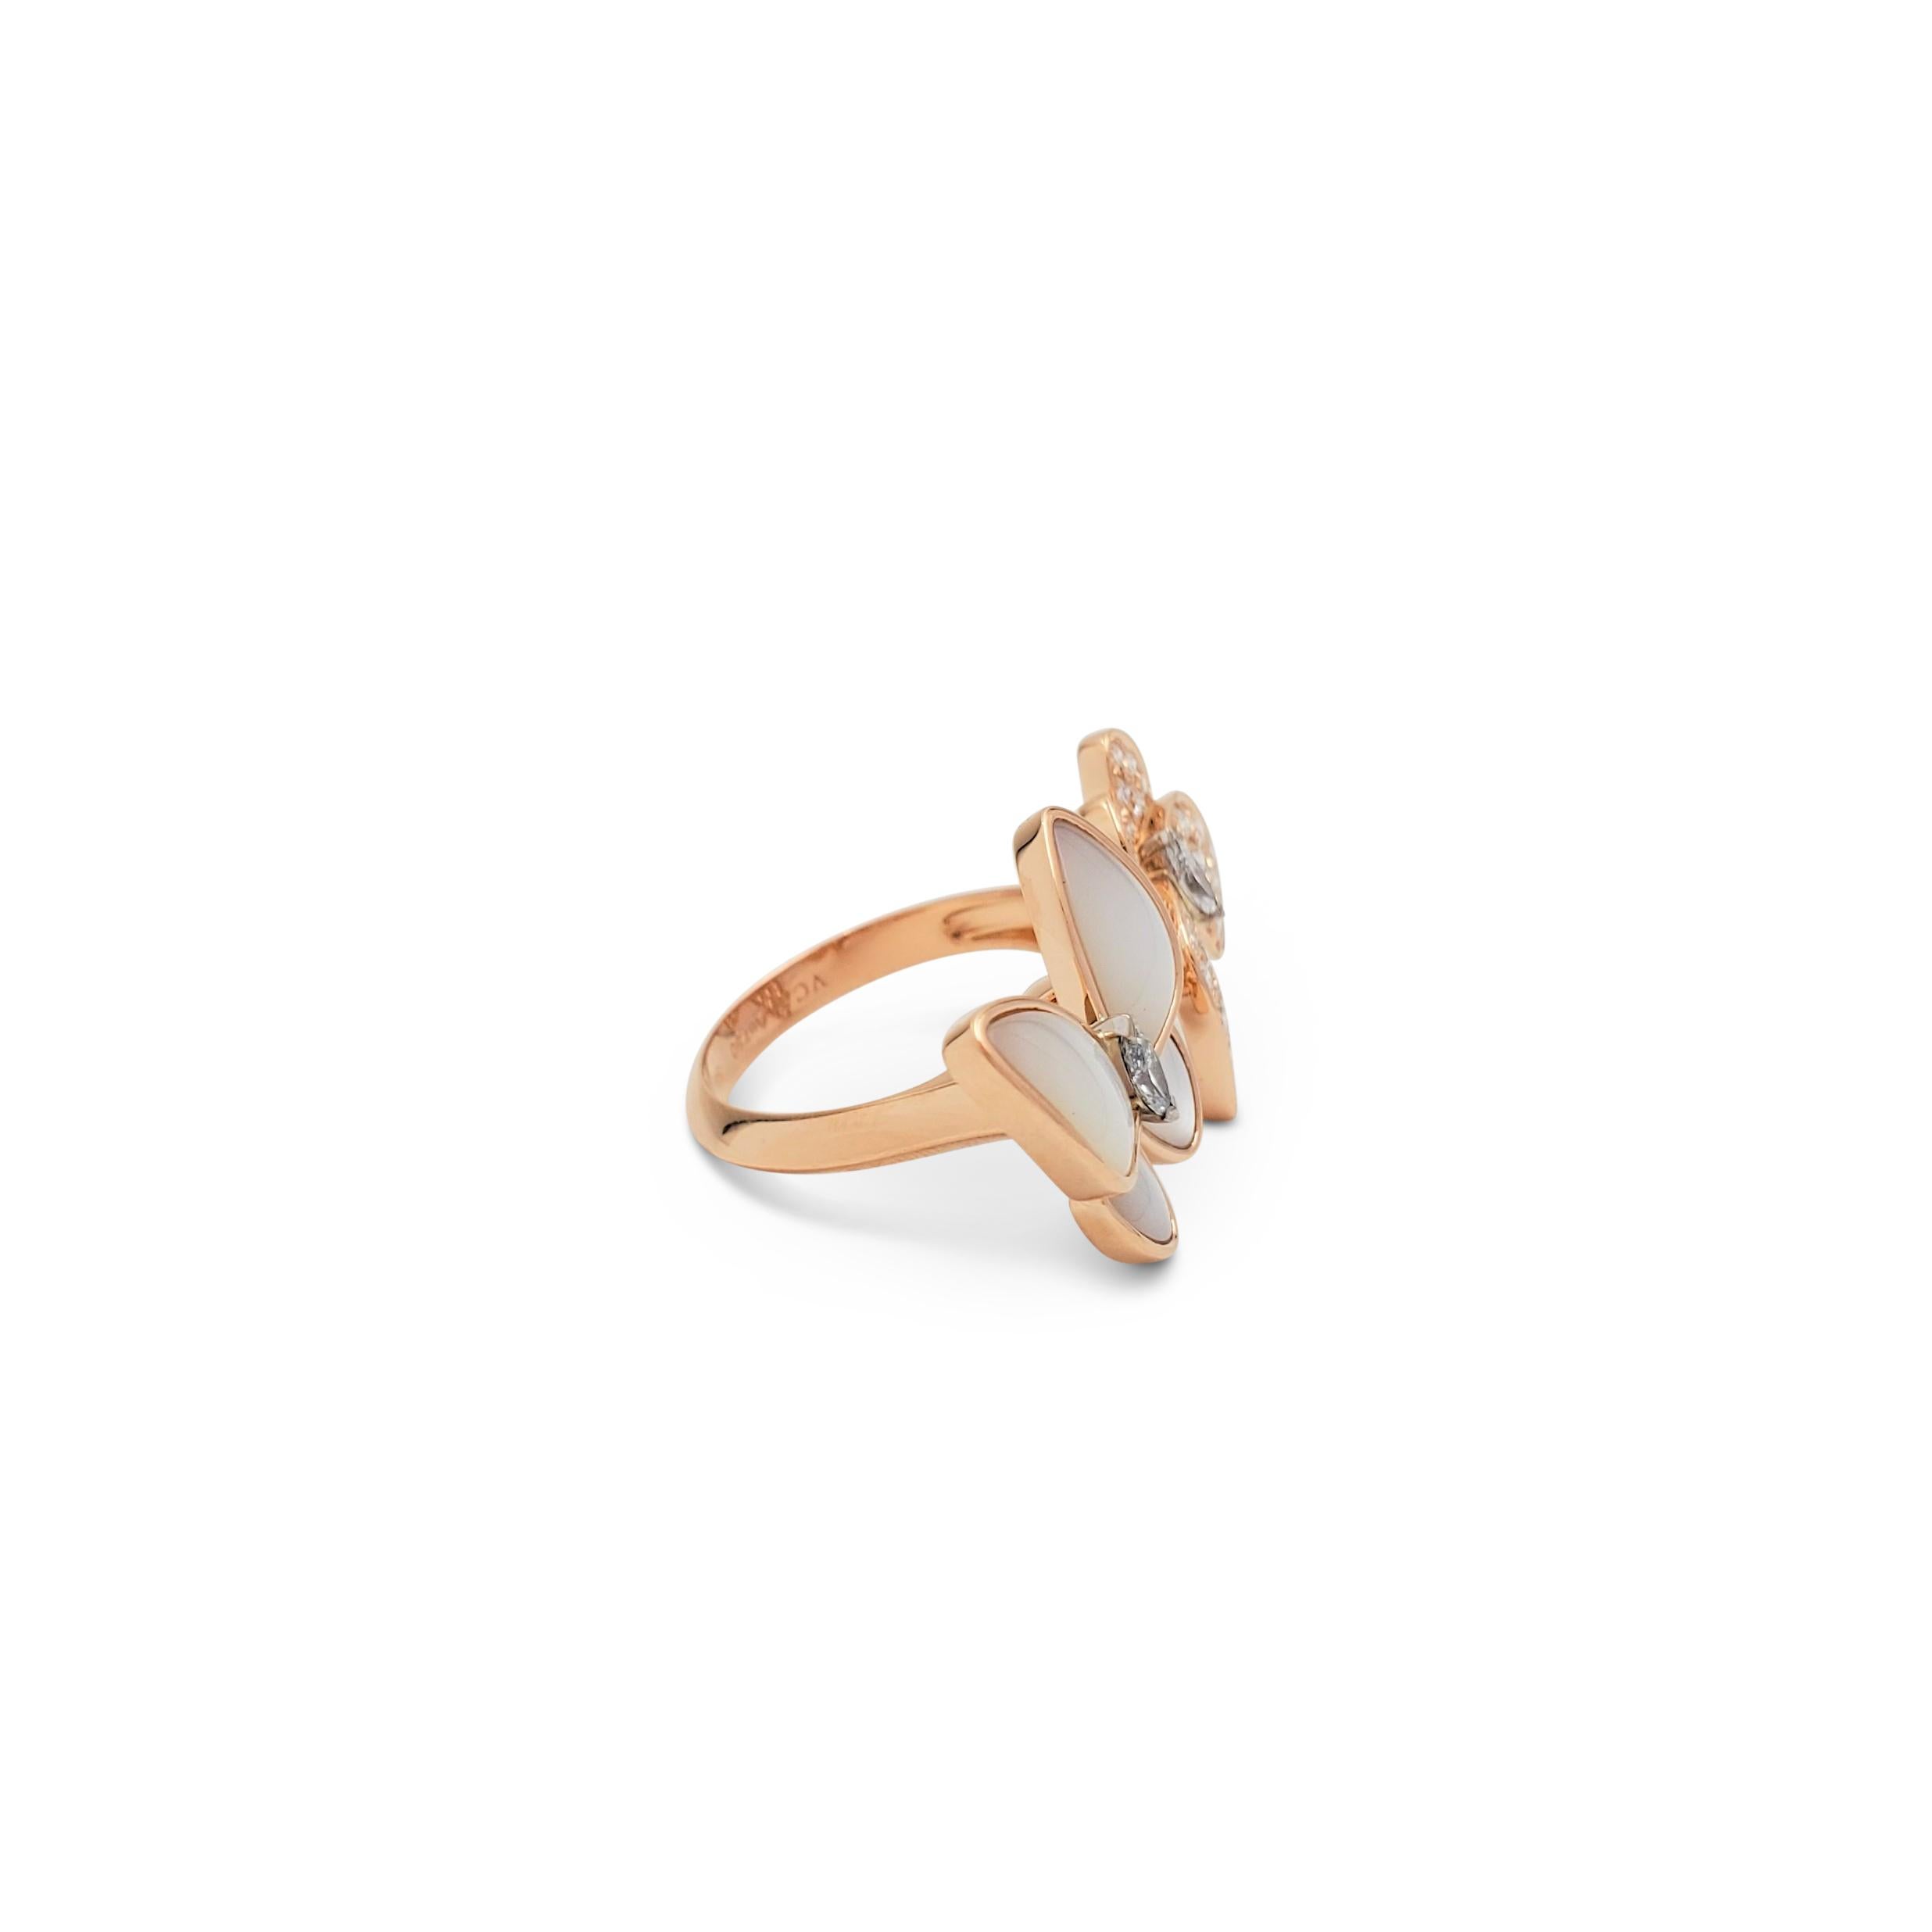 van cleef two butterfly ring